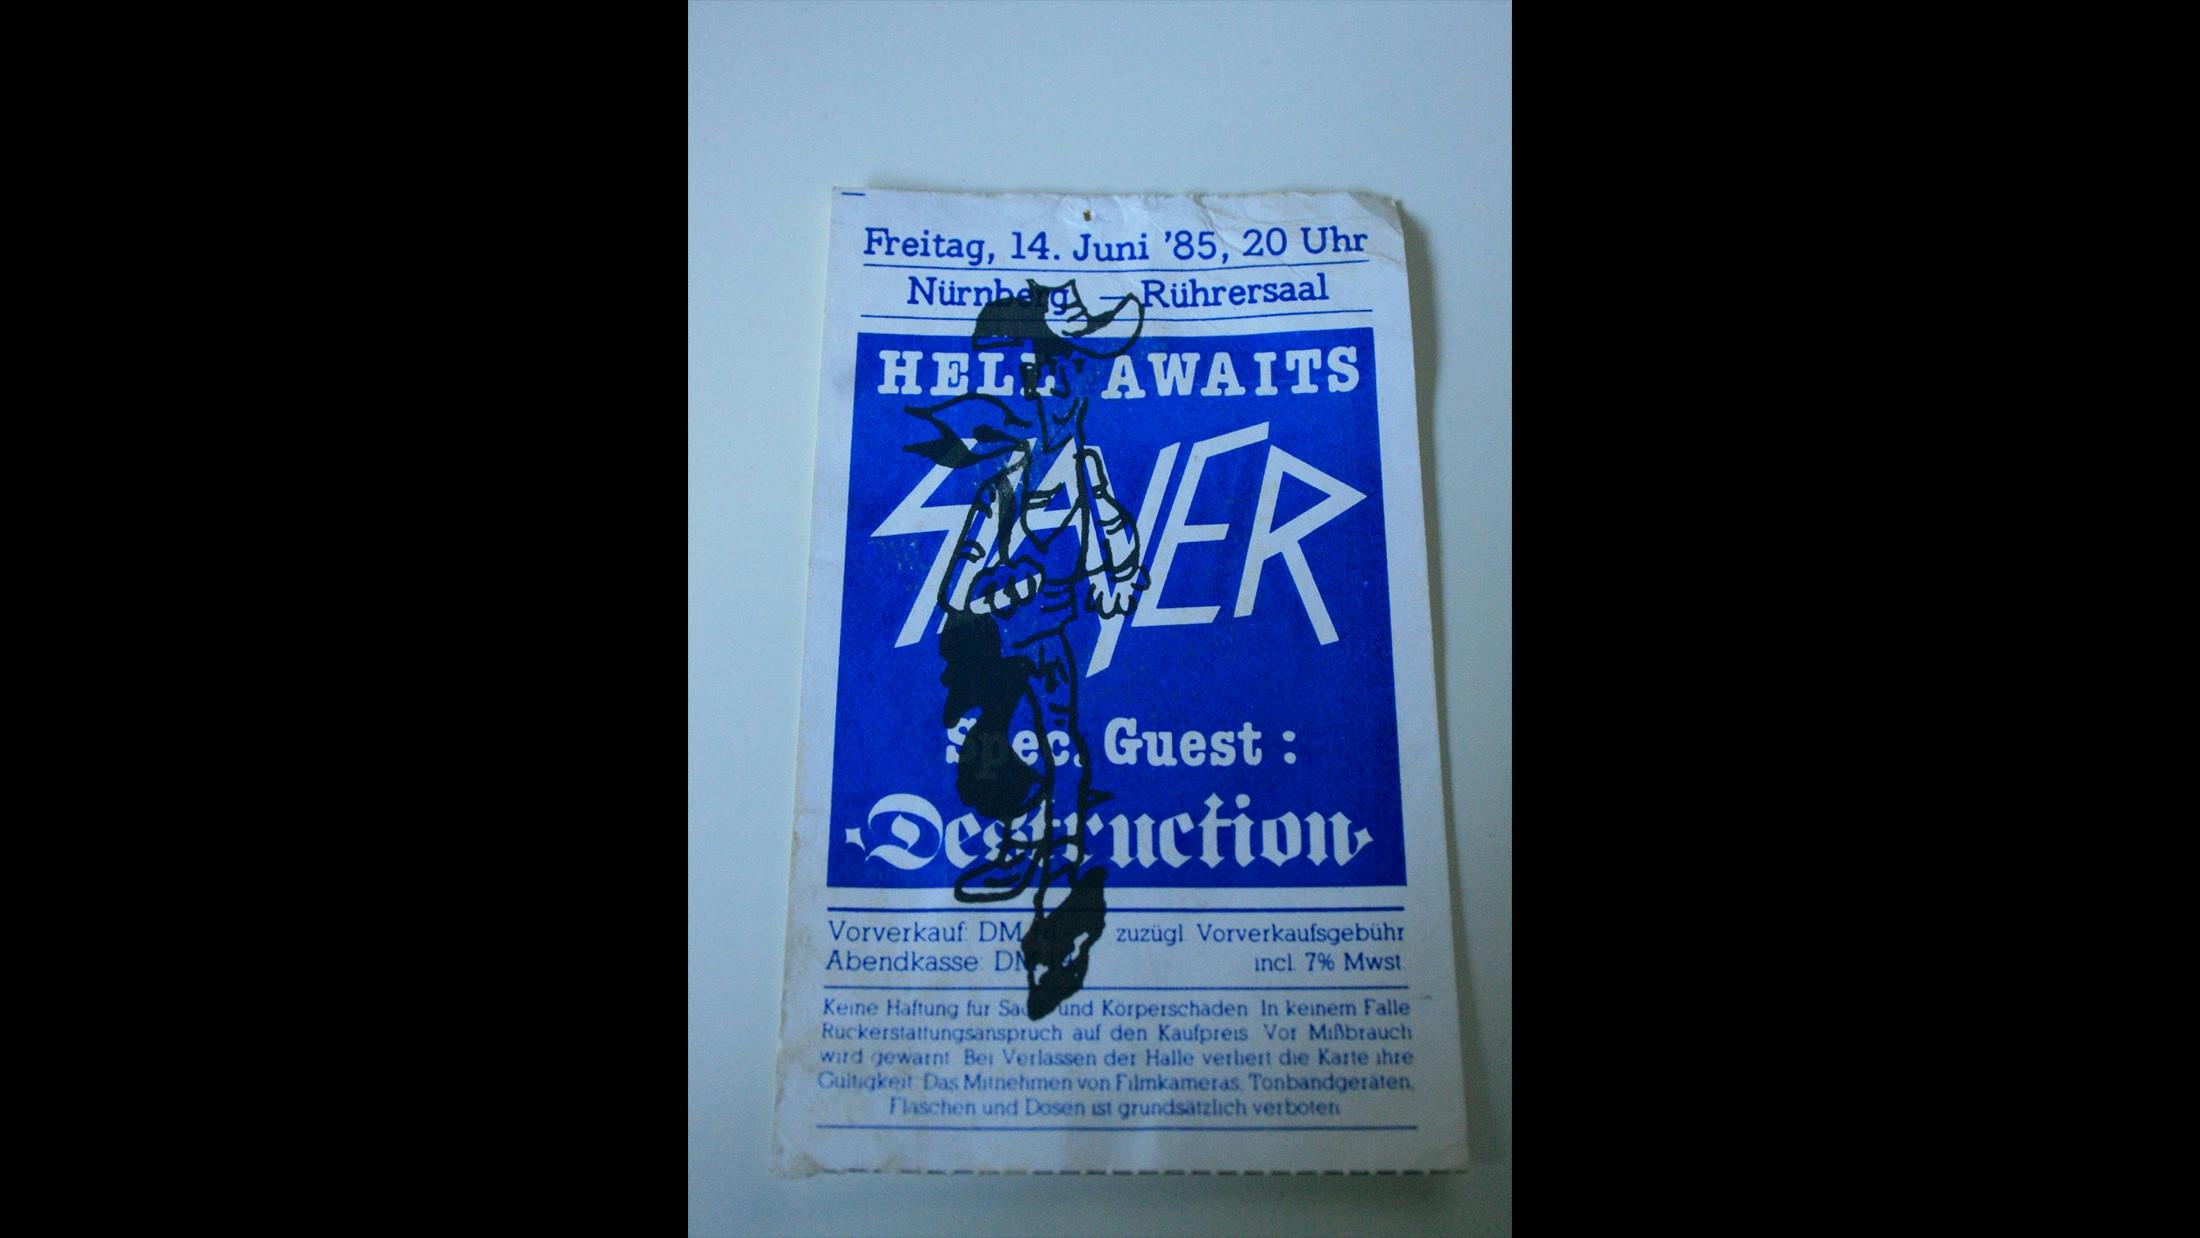 The Slayer tour ‘85 really shaped us at that time. We were just some crazy, inexperienced country boys and Slayer was already a big name. We learned a lot from that tour. We also learnt a lesson about drinking with older guys…it might get very expensive!